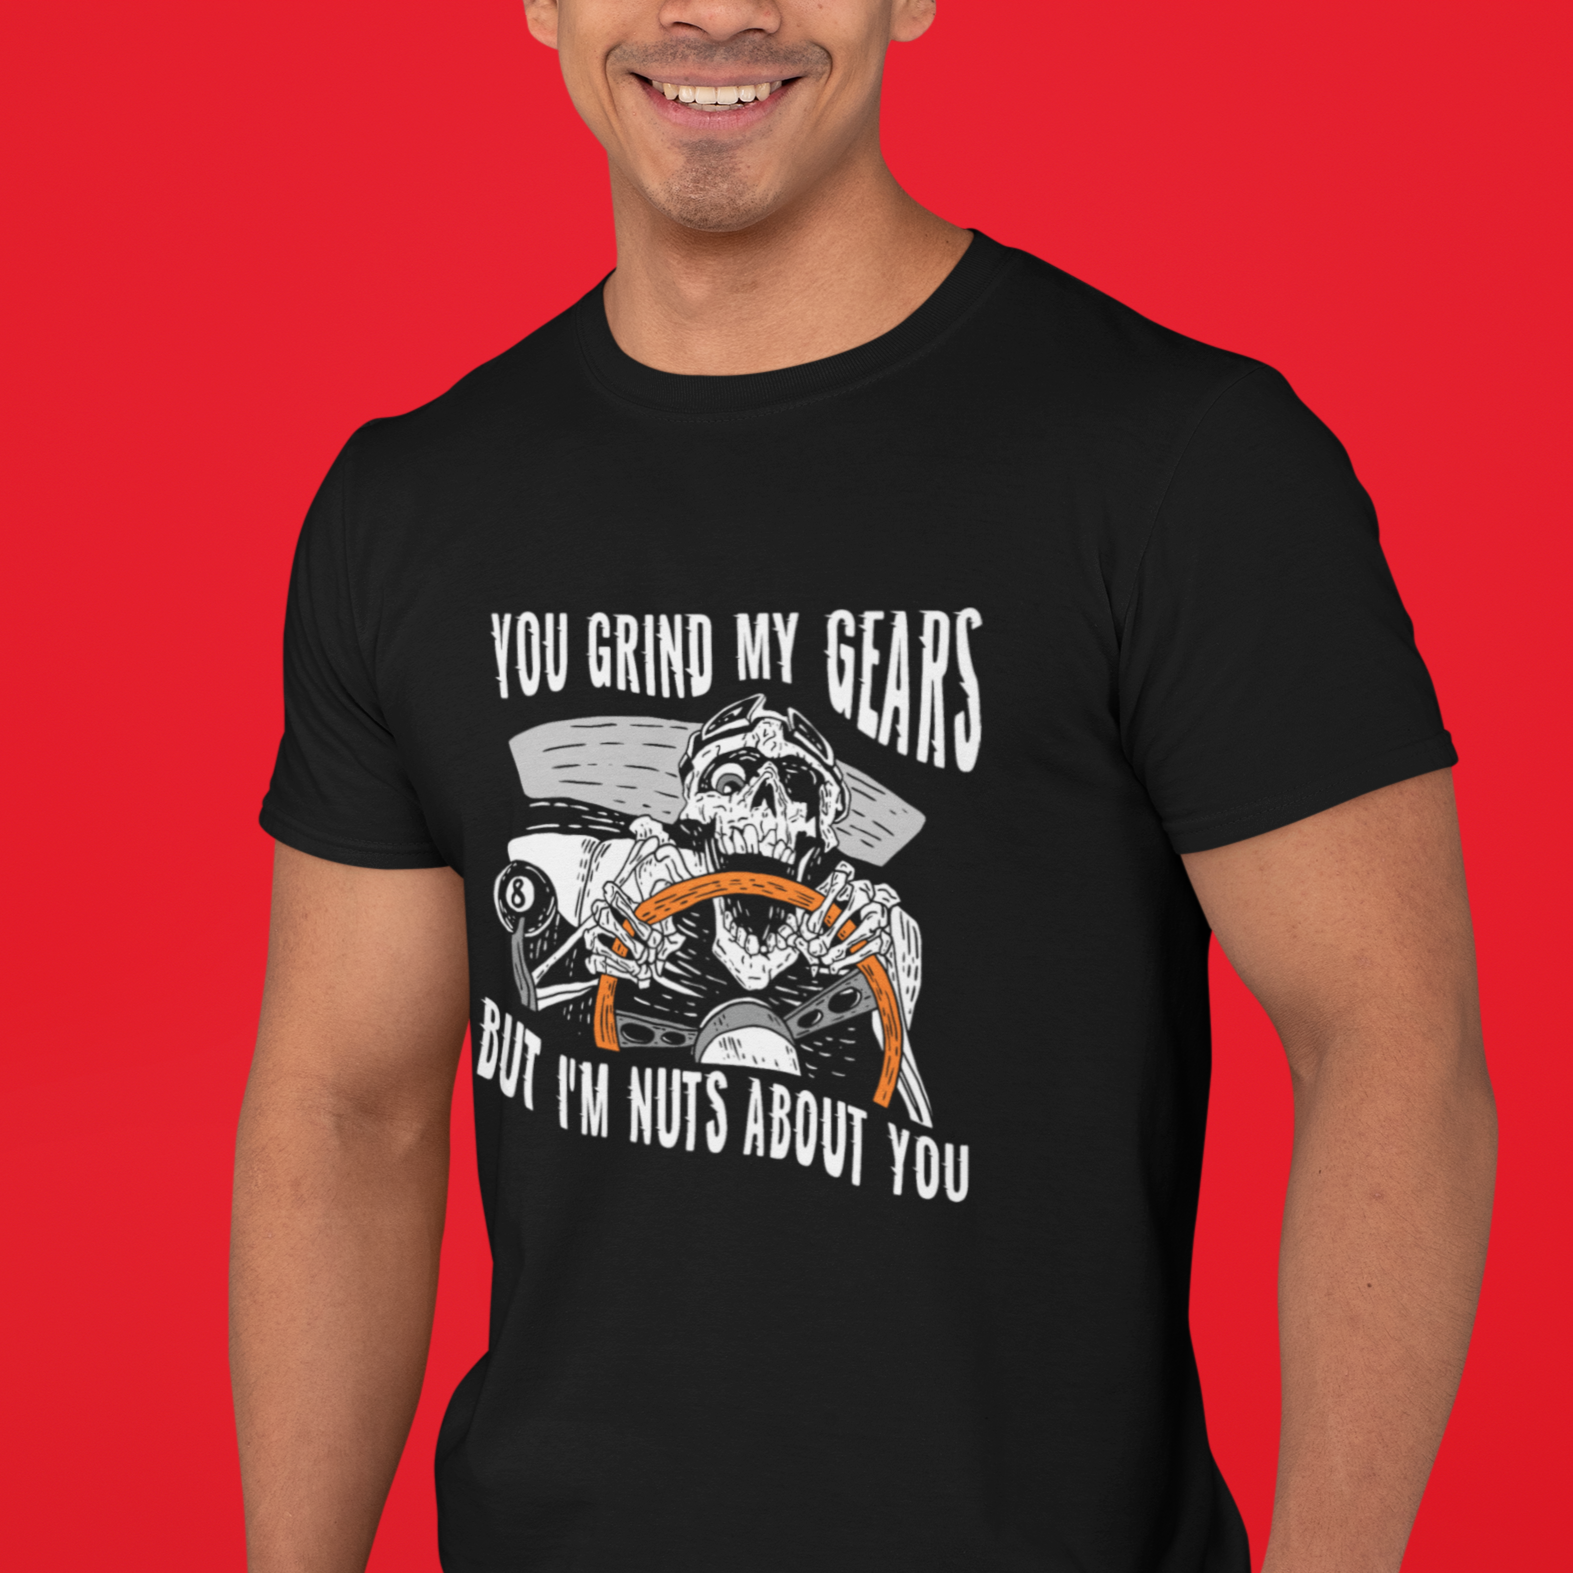 Funny Car Enthusiast Gift Unisex Shirt, Car Guy Valentines Day Gift, Skeleton Driver Shirt, You Grind My Gears Shirt, Hot Rod Gift Shirt